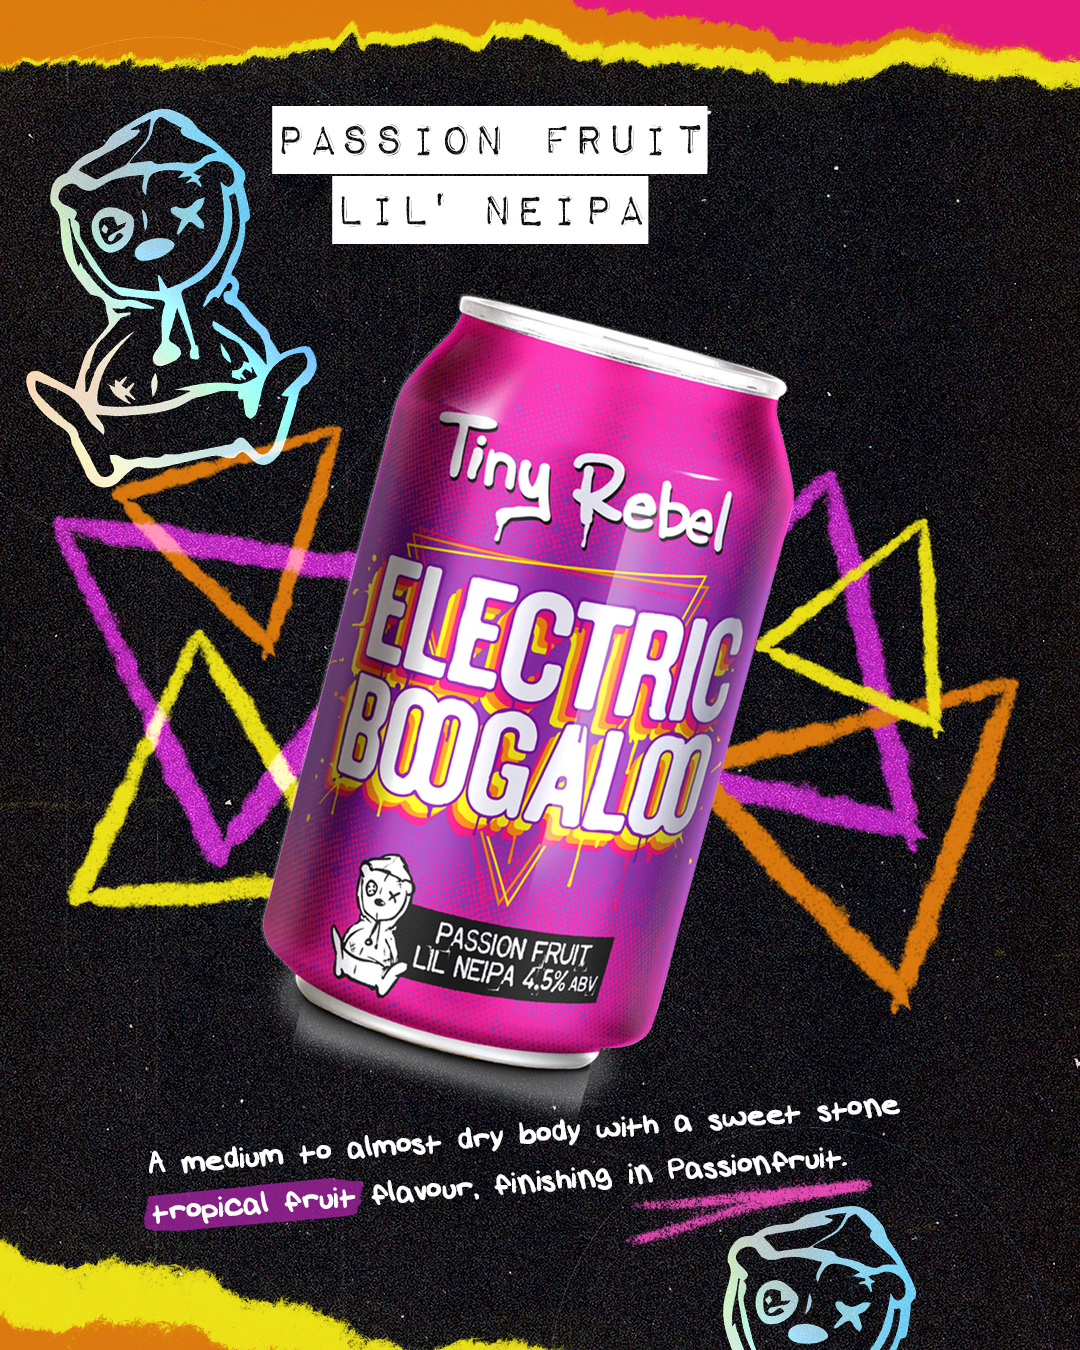 Brand content design for Tiny Rebel's Electric Boogaloo beer